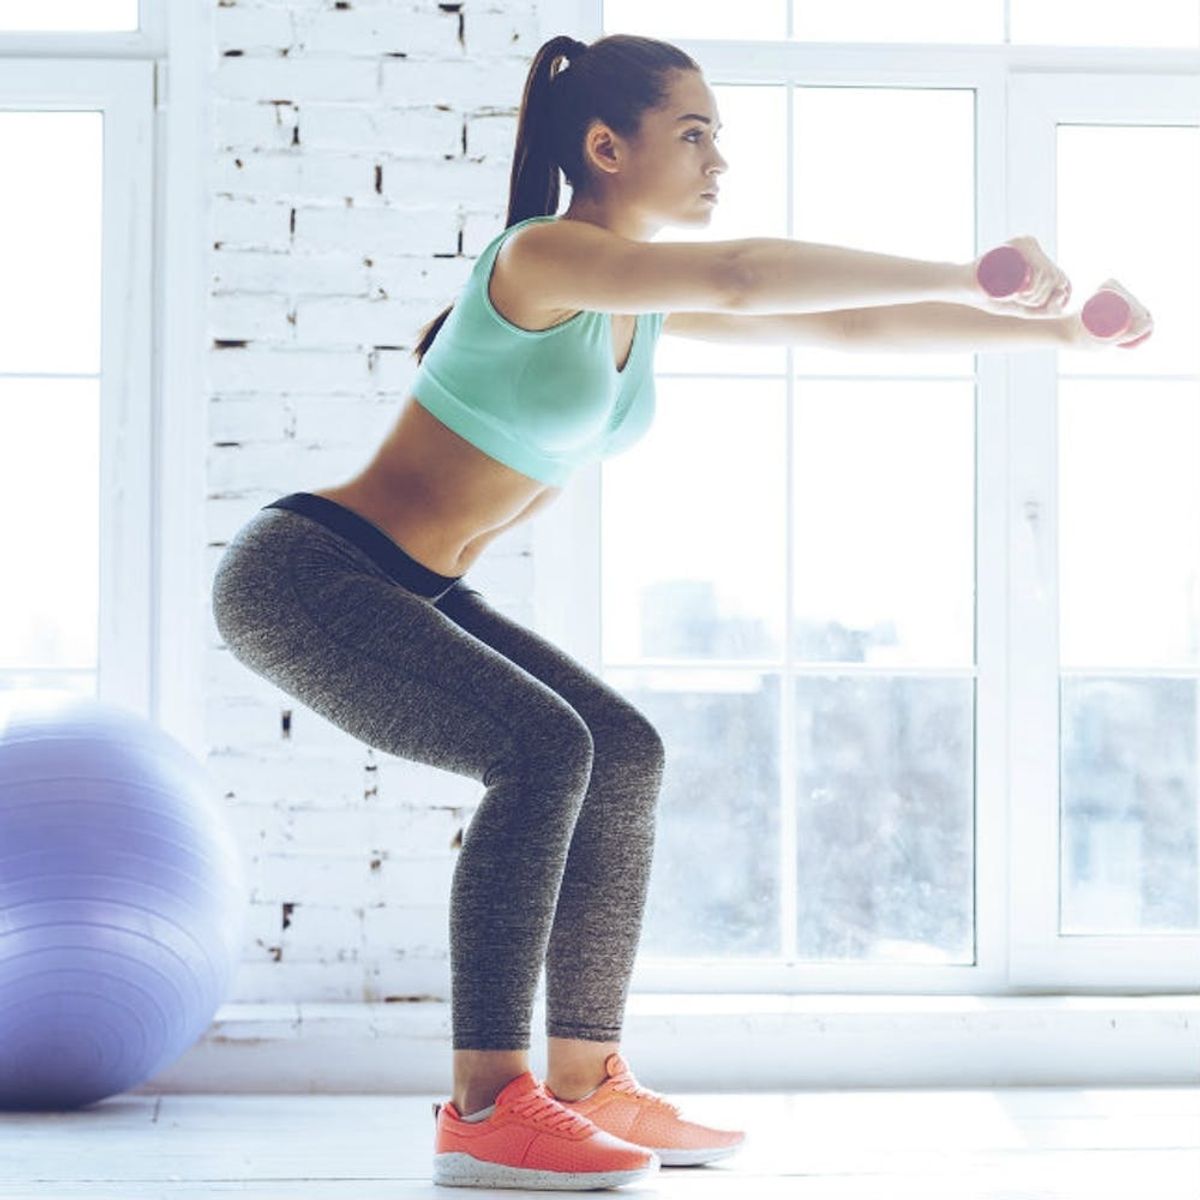 7 Workouts That’ll Give You Buns of Steel